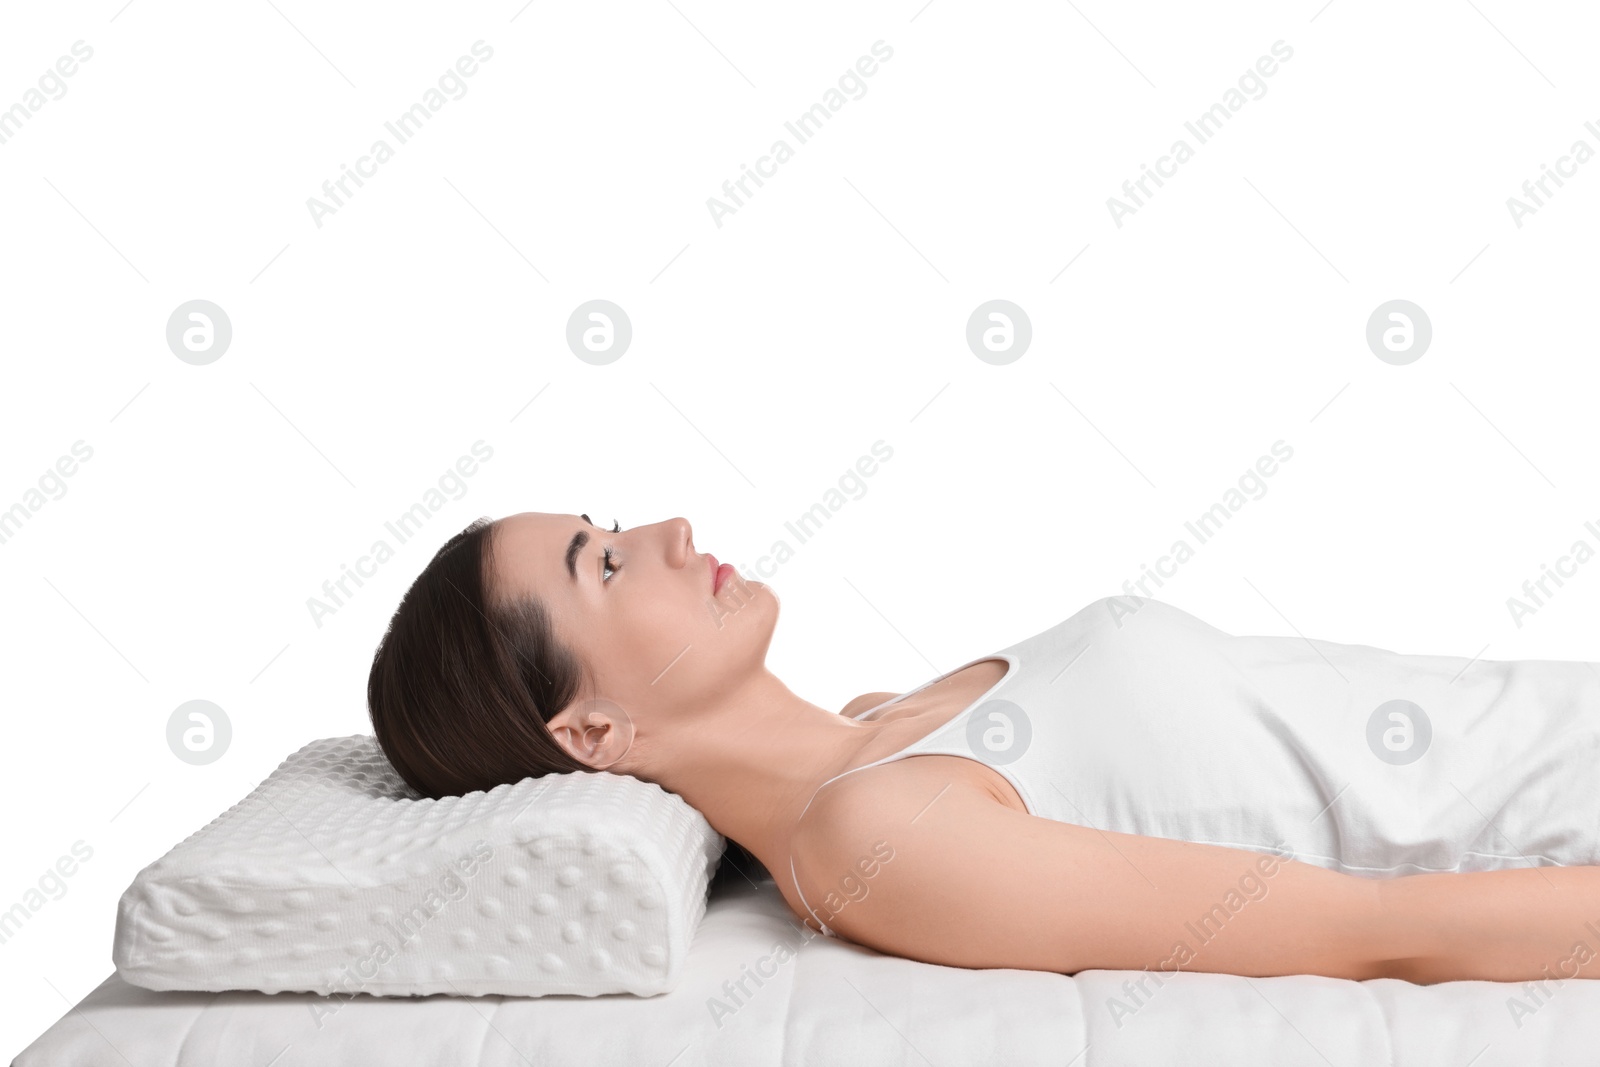 Photo of Woman lying on orthopedic pillow against white background